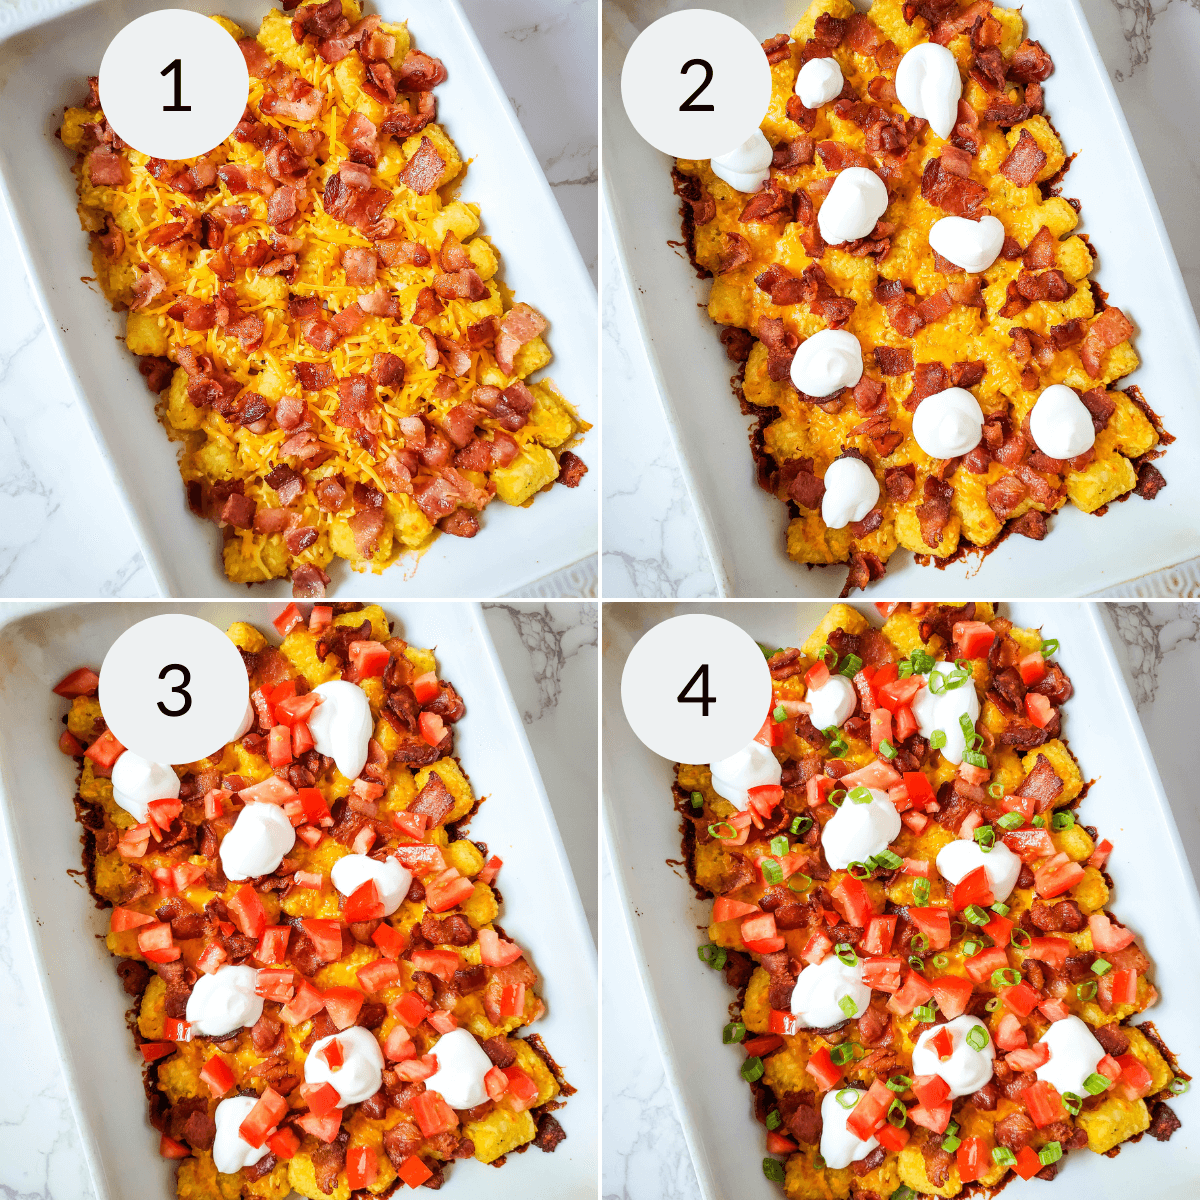 Four pictures demonstrating the process of making a casserole with bacon, tomatoes, and sour cream, inspired by loaded tater tots.